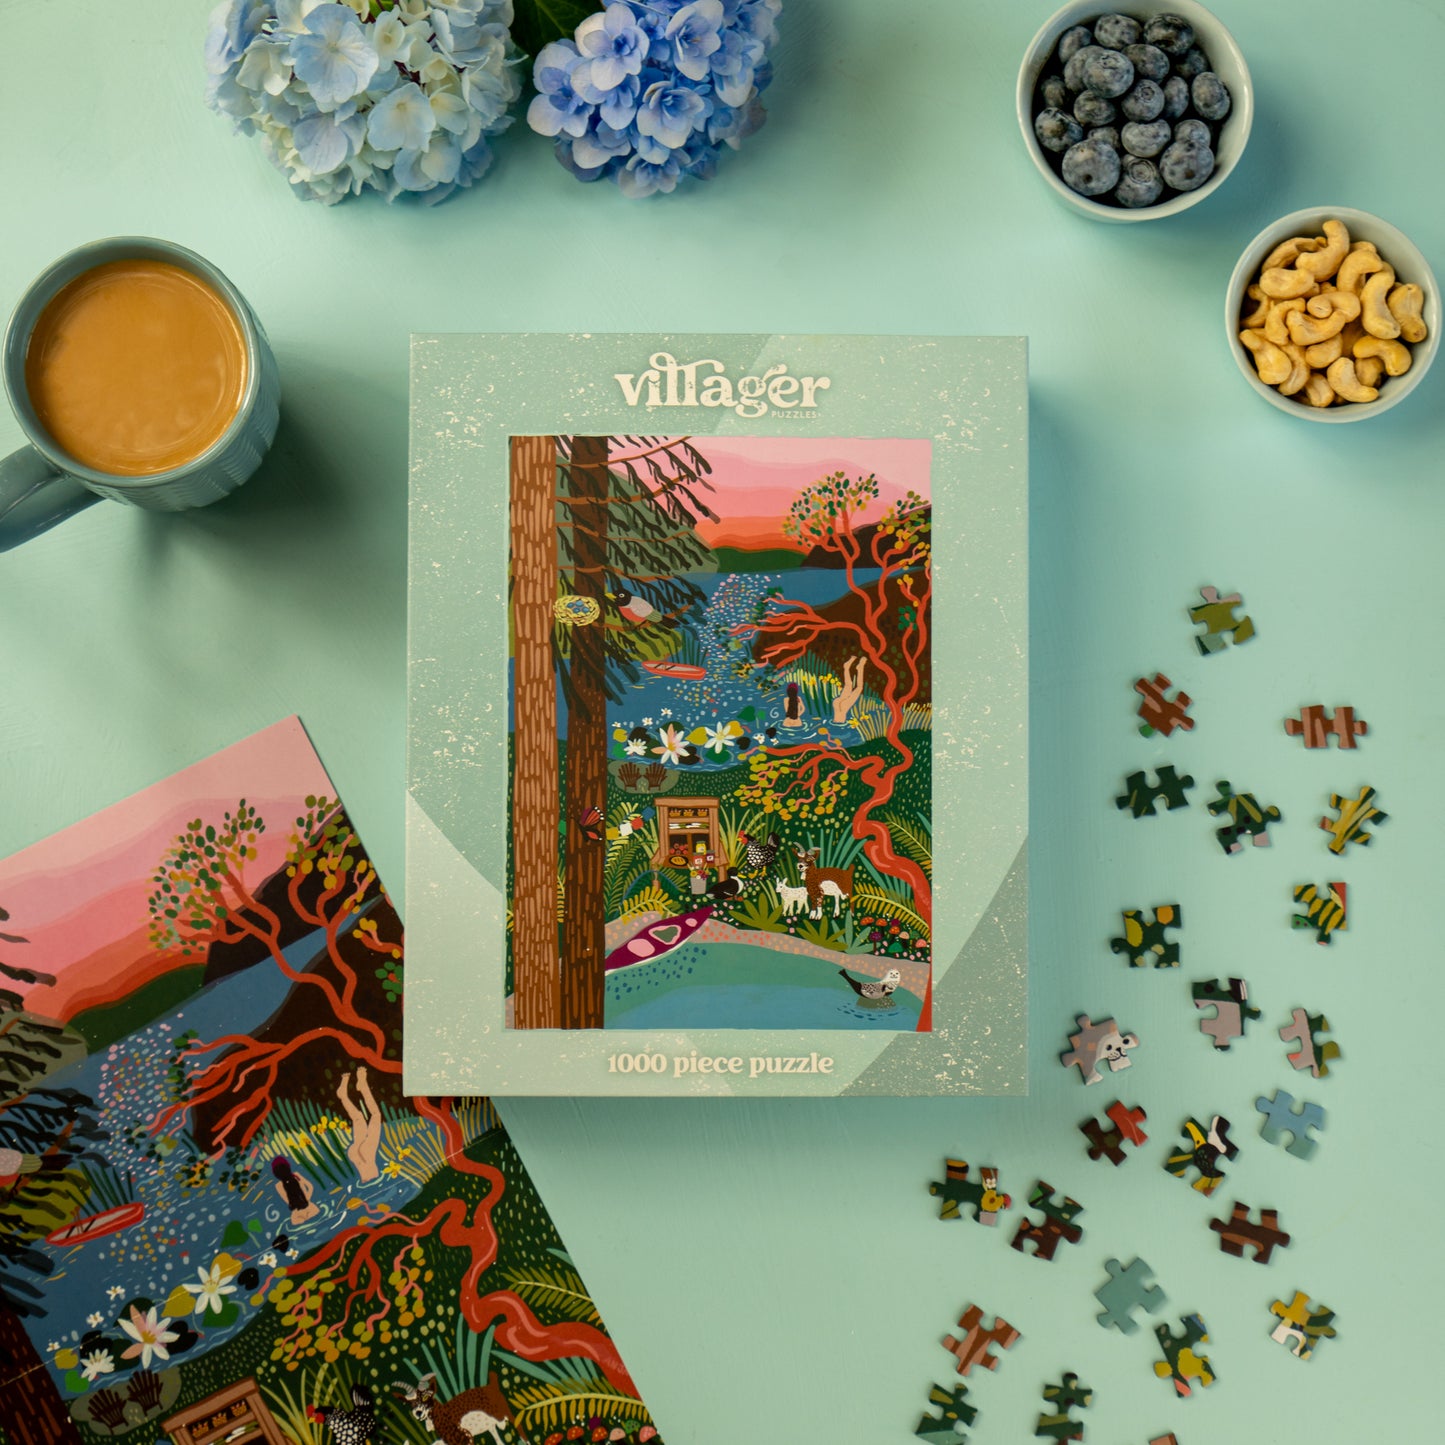 Lifestyle image of Villager Puzzles Salt Spring Island | 1000-piece jigsaw puzzle featuring Salt Spring Island's scenic landscape designed by Anja Jane